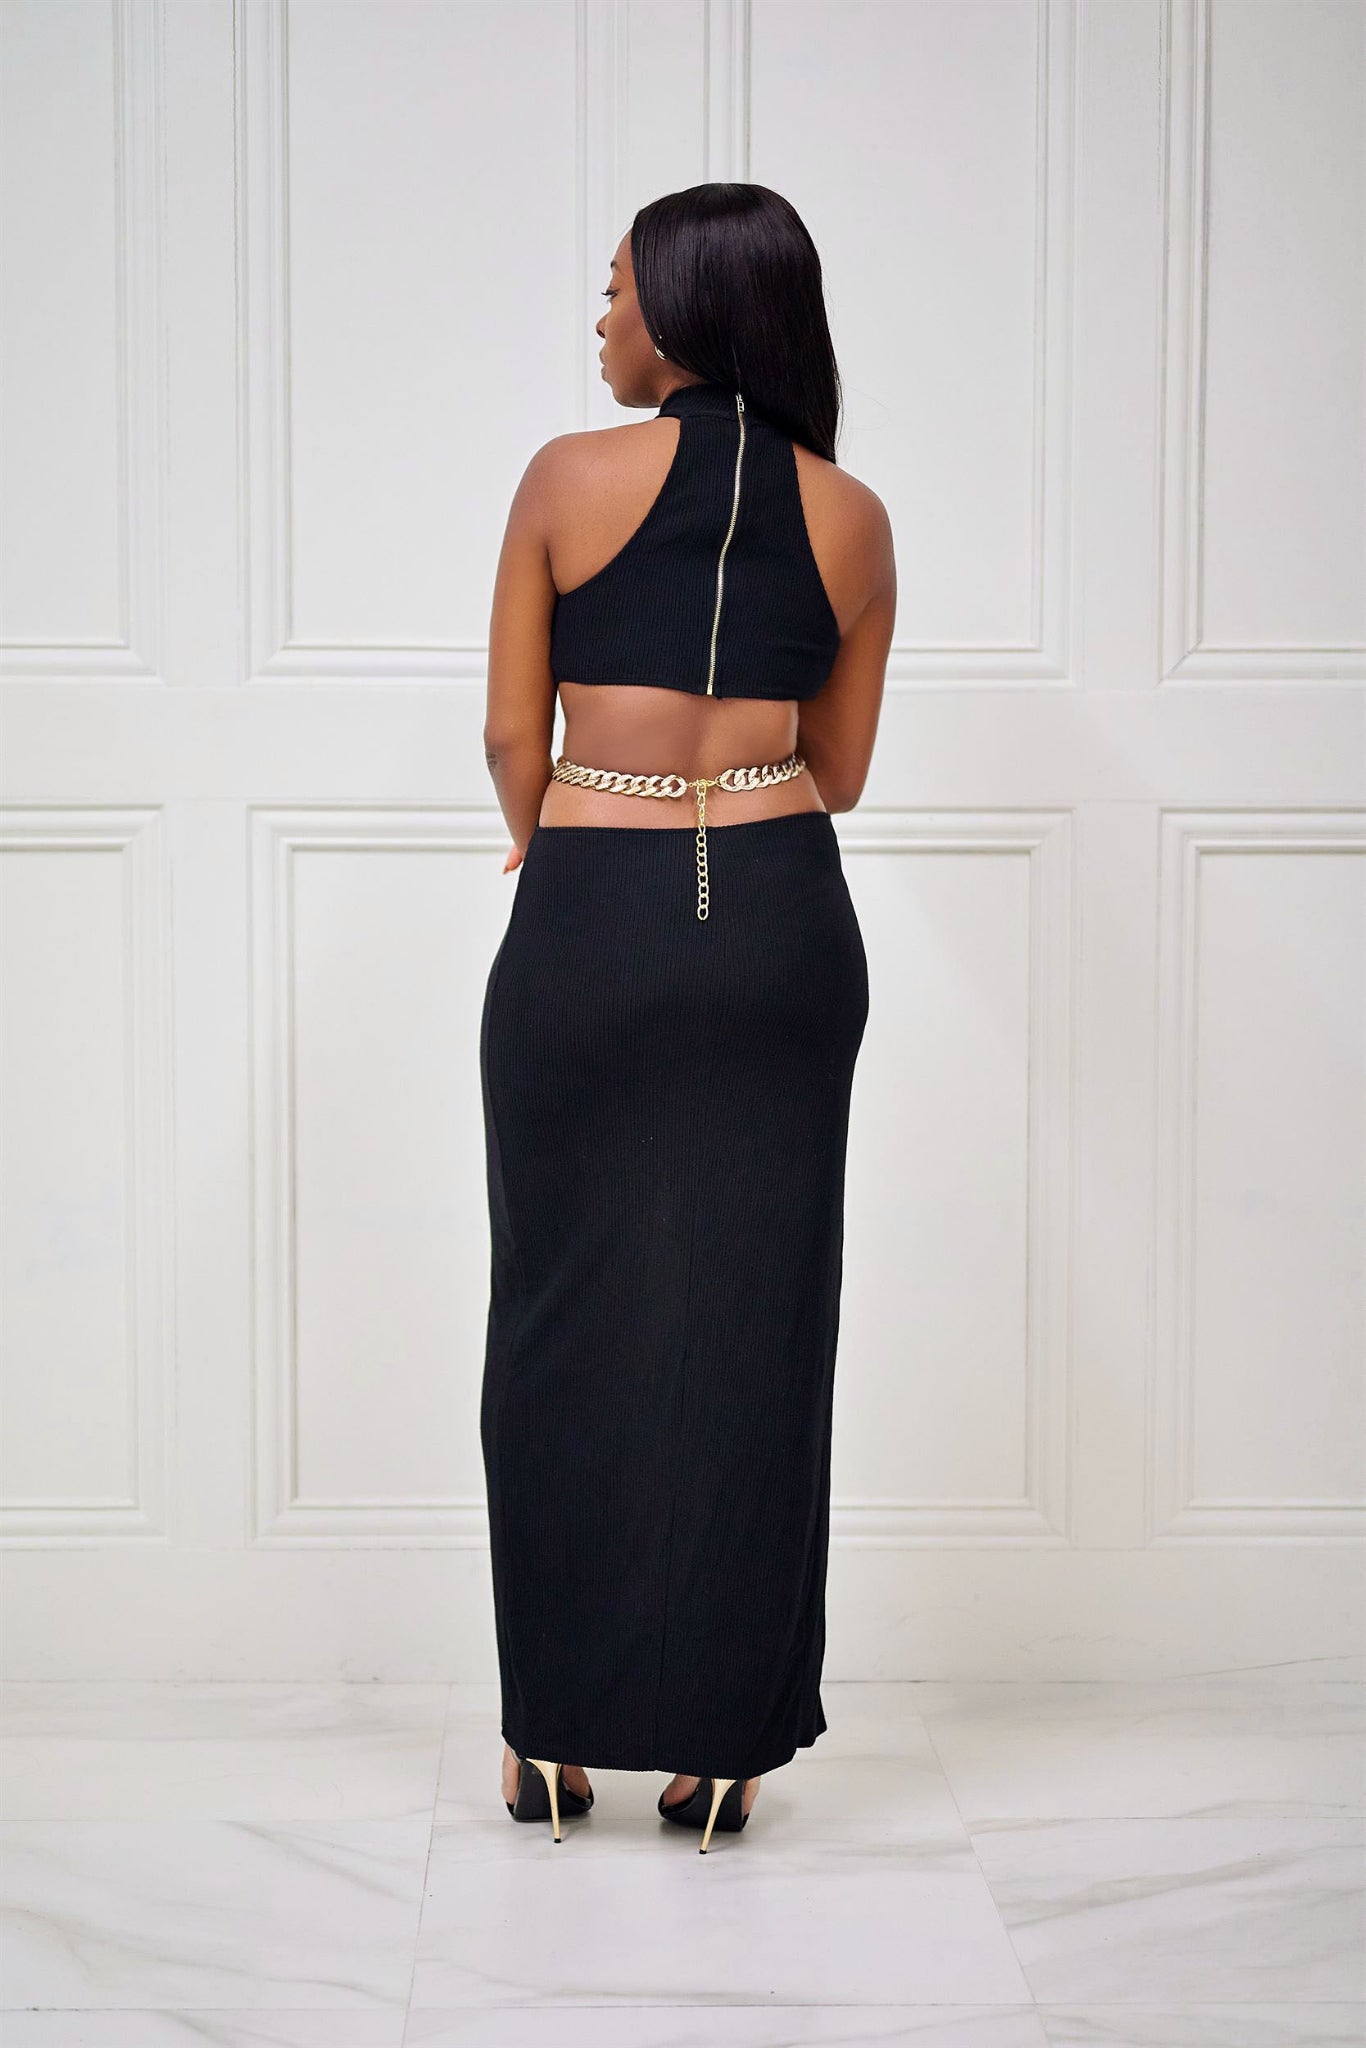 All Eyes on You Black Maxi Dress with Thigh-High Slit